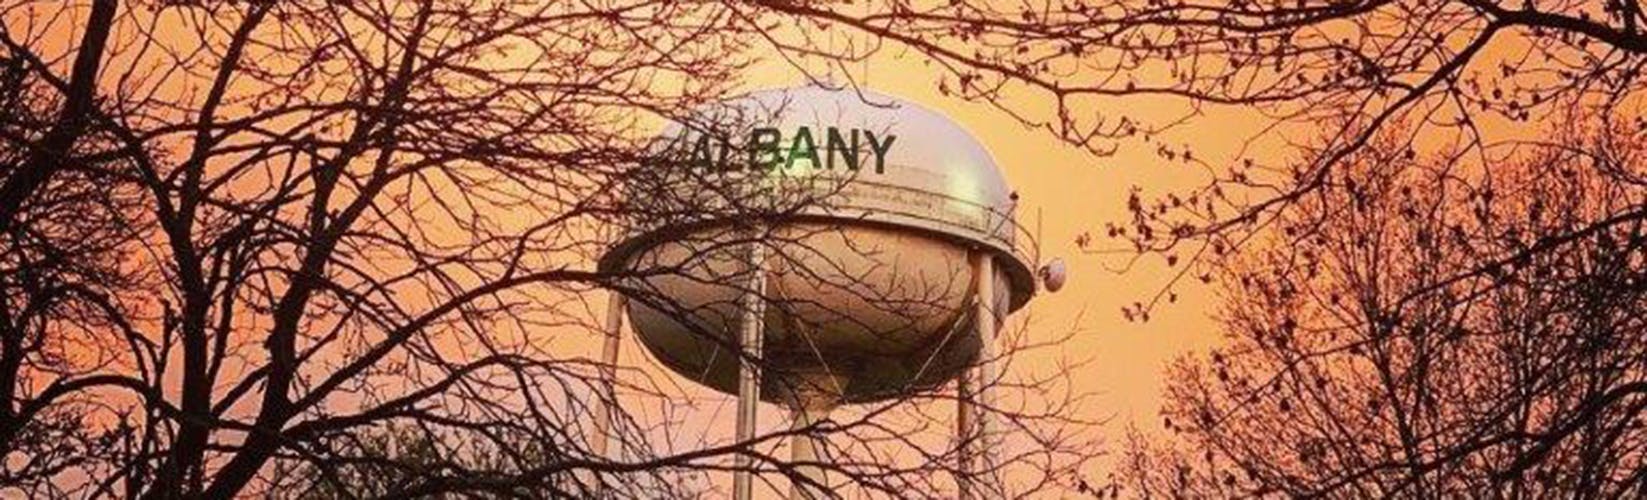 Albany Watertower in Spring